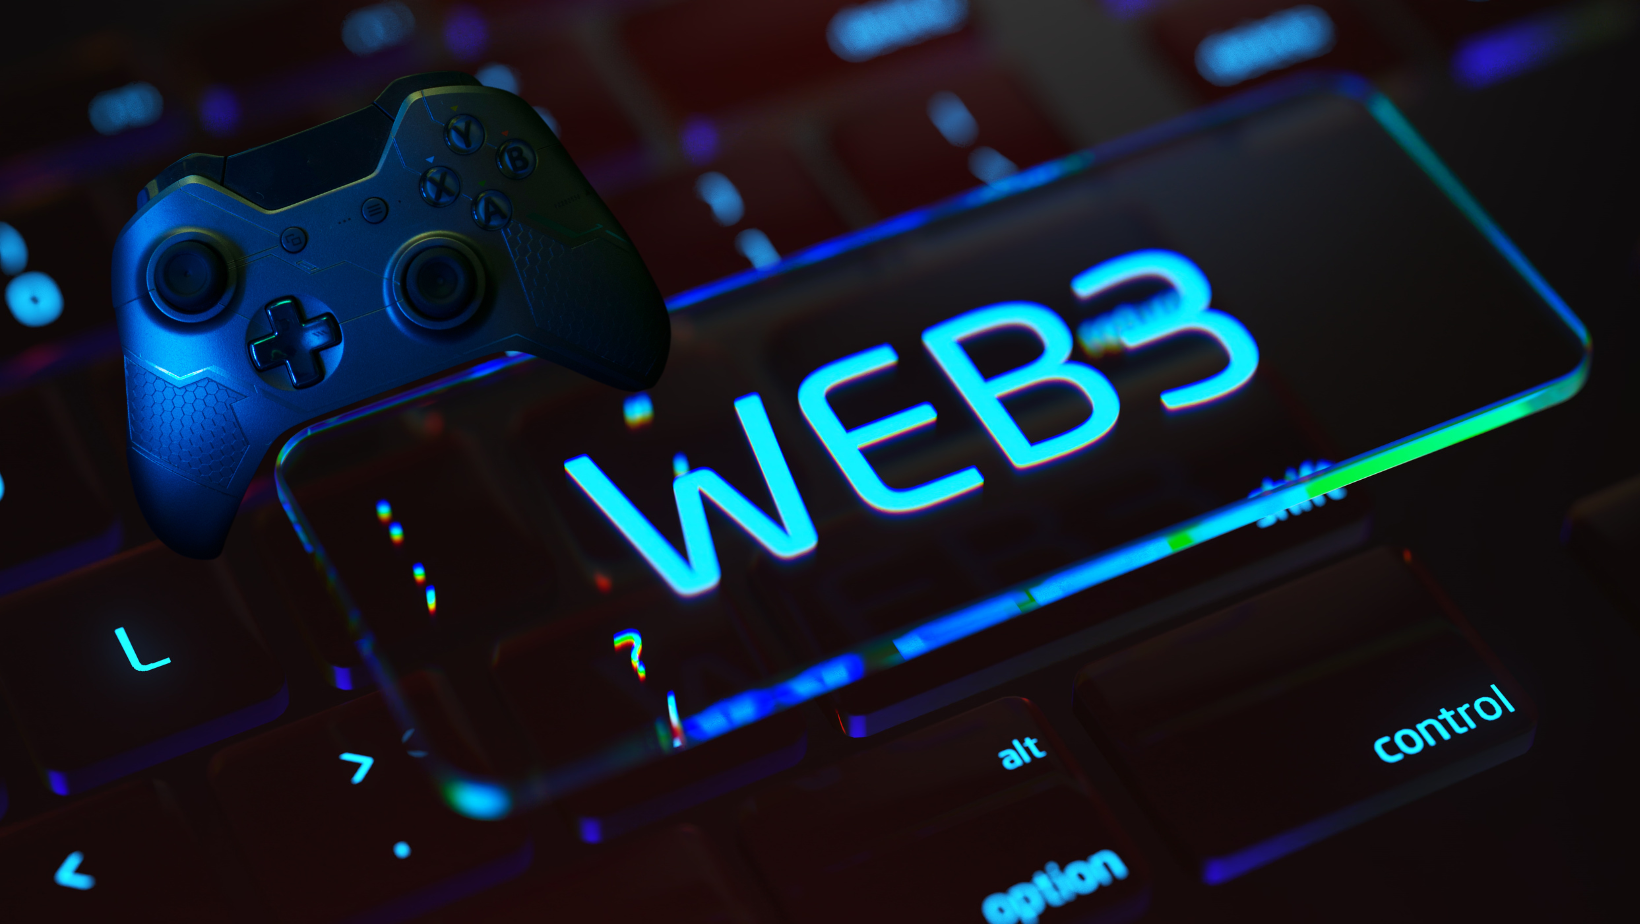 It’s time for Web3 gaming to up its own game